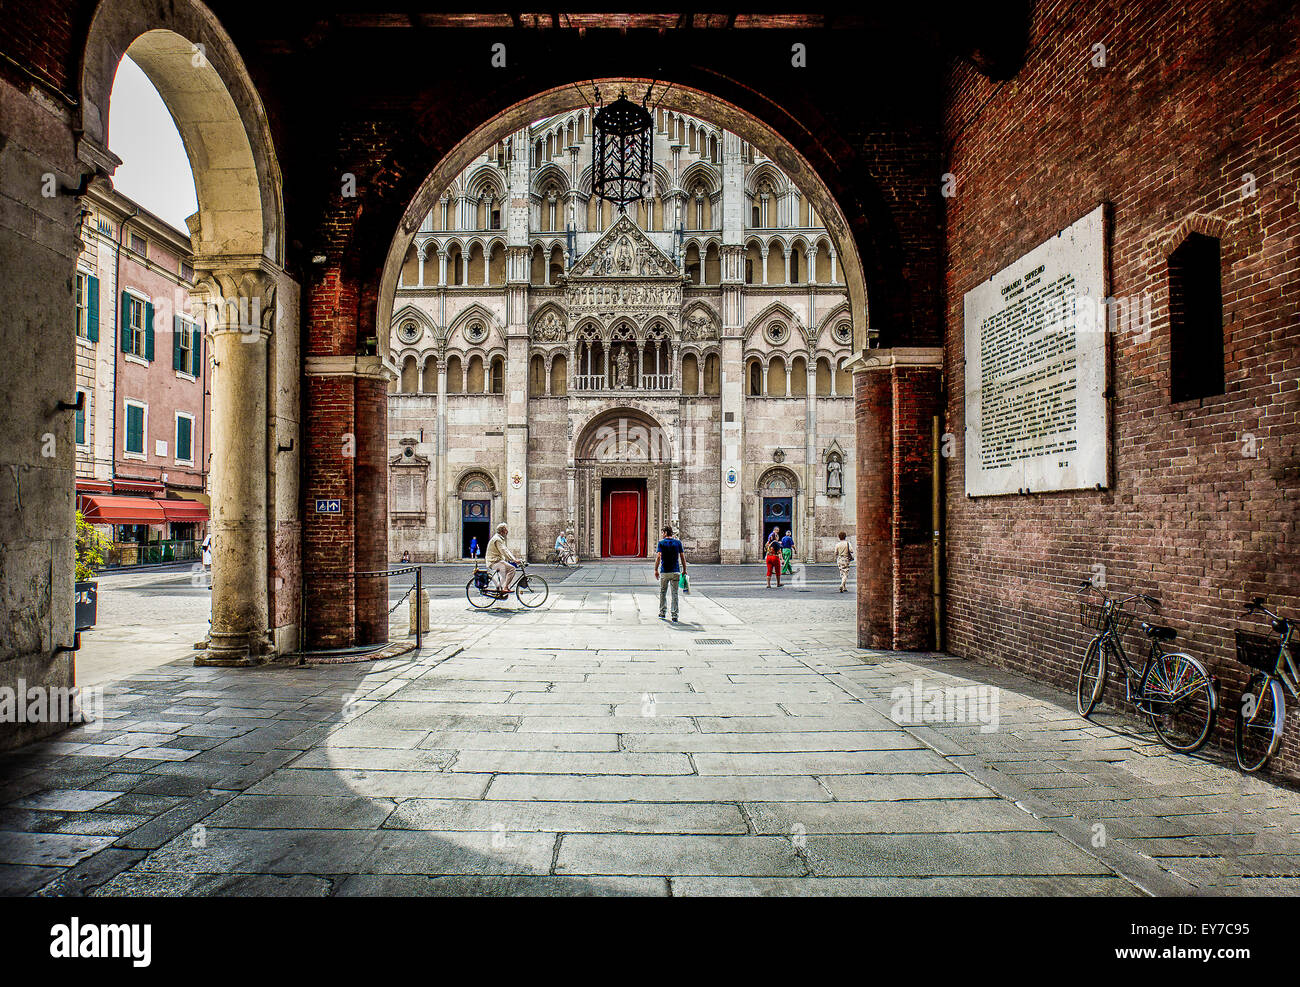 Italy, Ferrara, the Ducale palace court and the cathedral Stock Photo